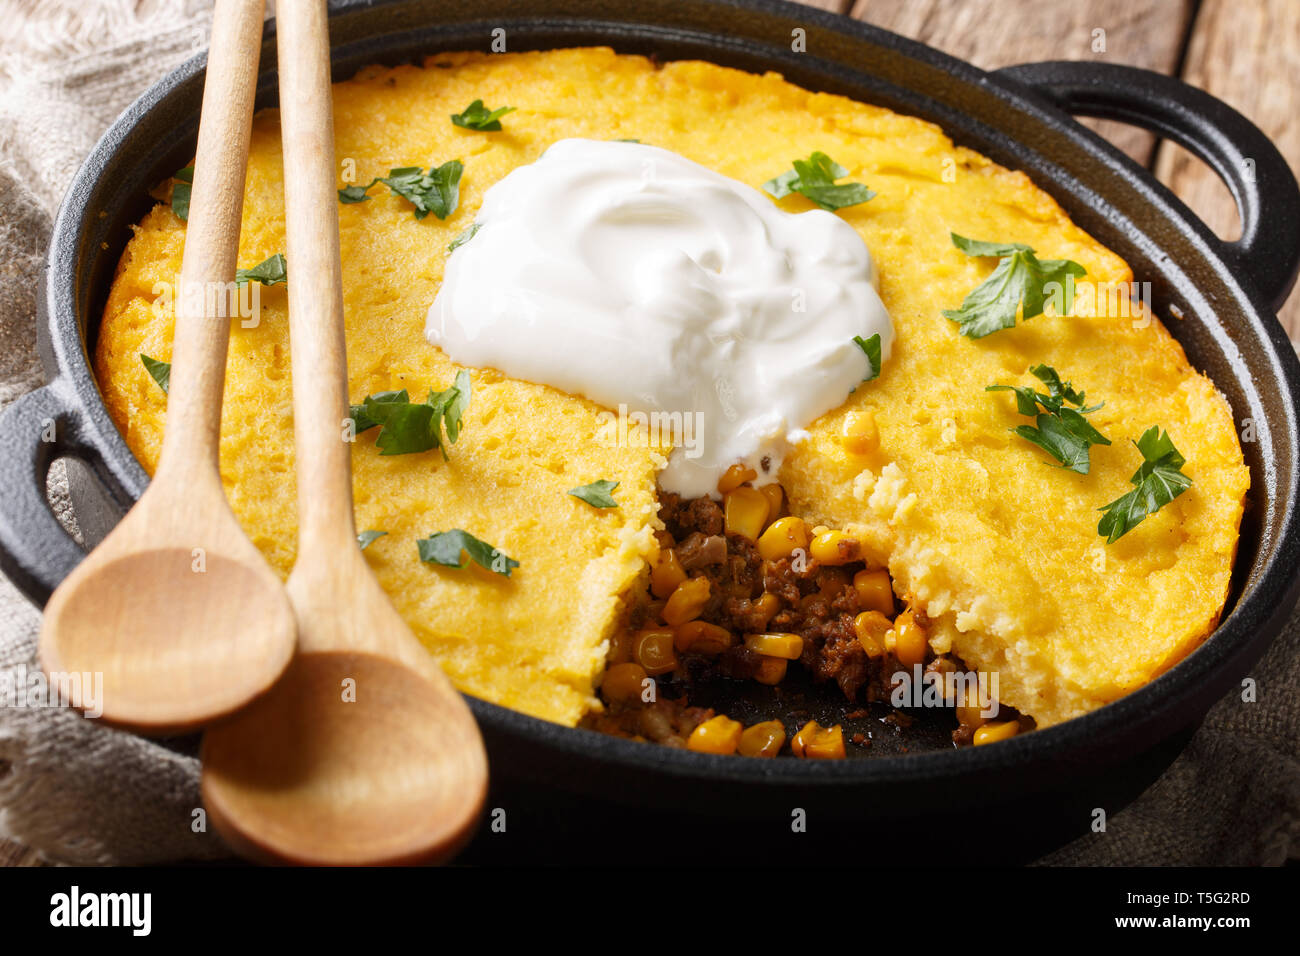 American Tamale corn pie crust and beef filling close-up in a pan on the table. Horizontal Stock Photo